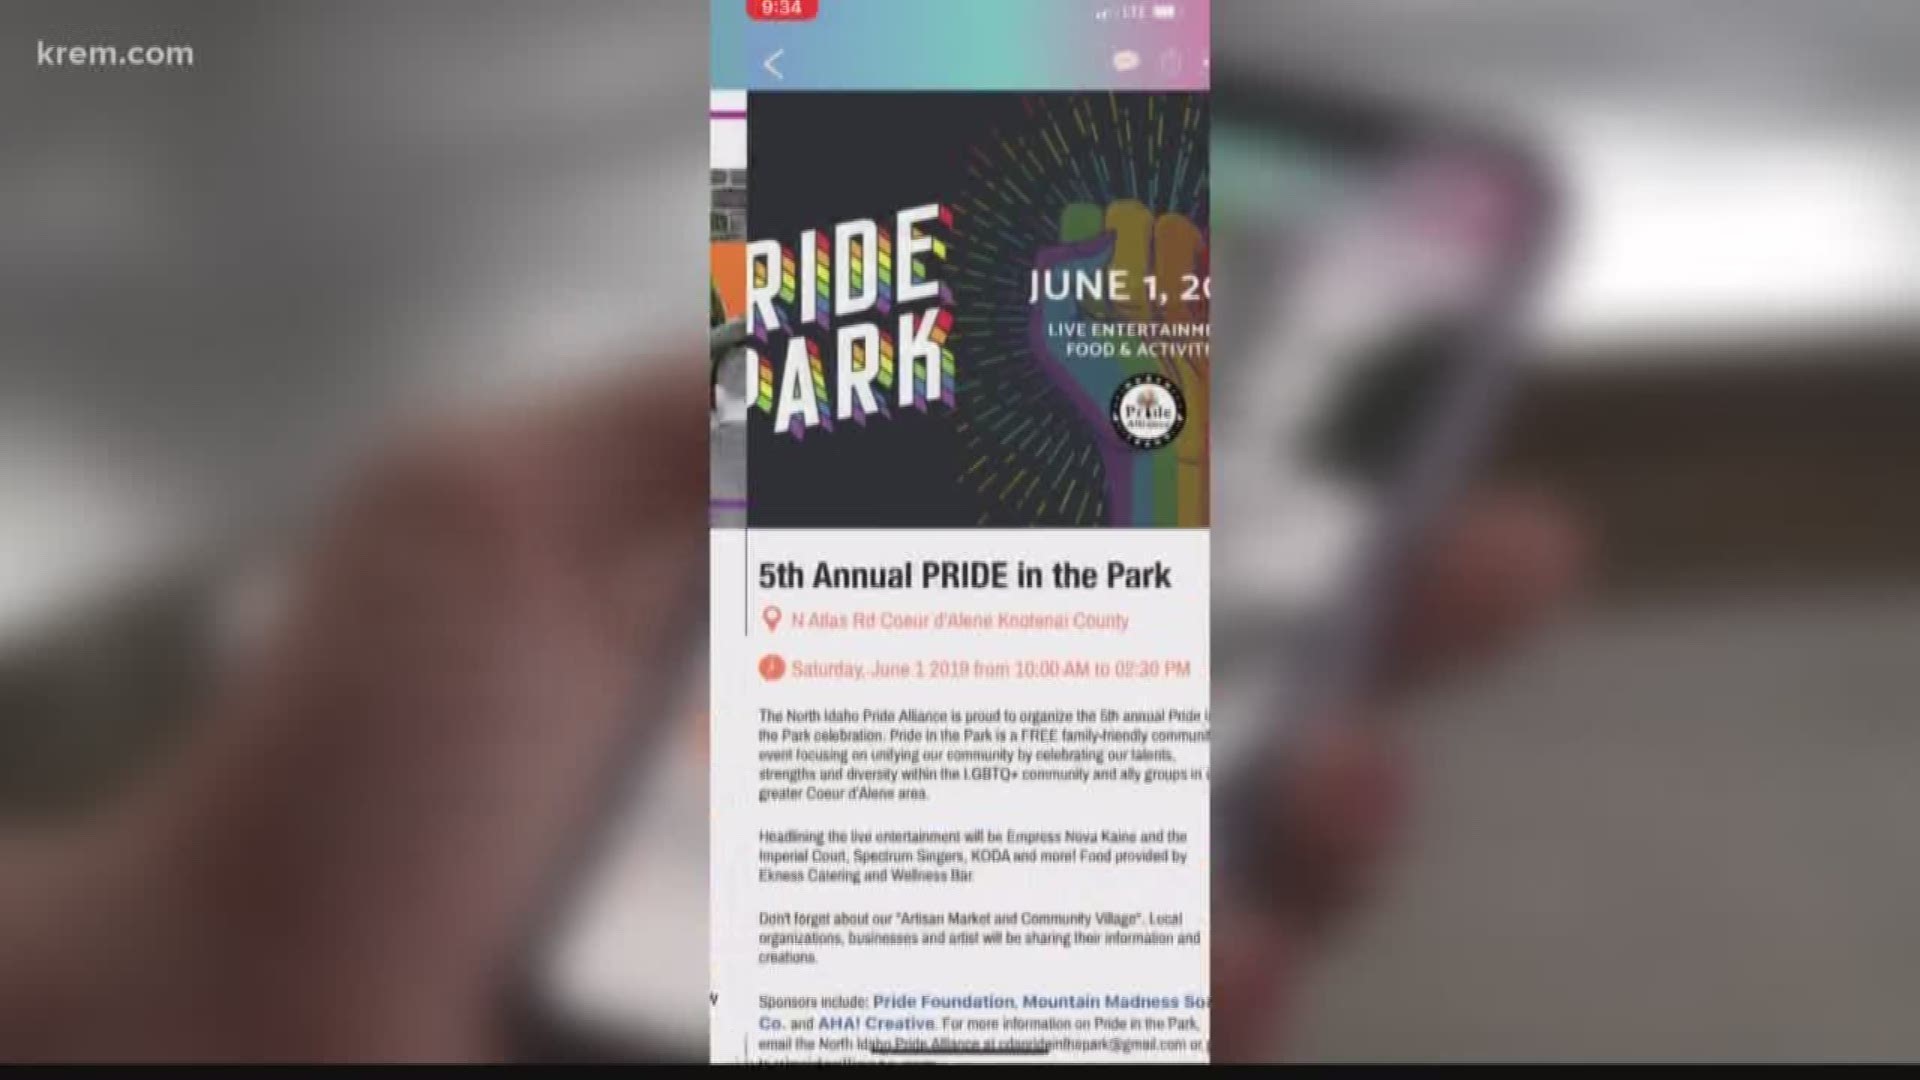 The app will help people follow the 2019 Spokane Pride Parade Route and find out more about activities, among other things.